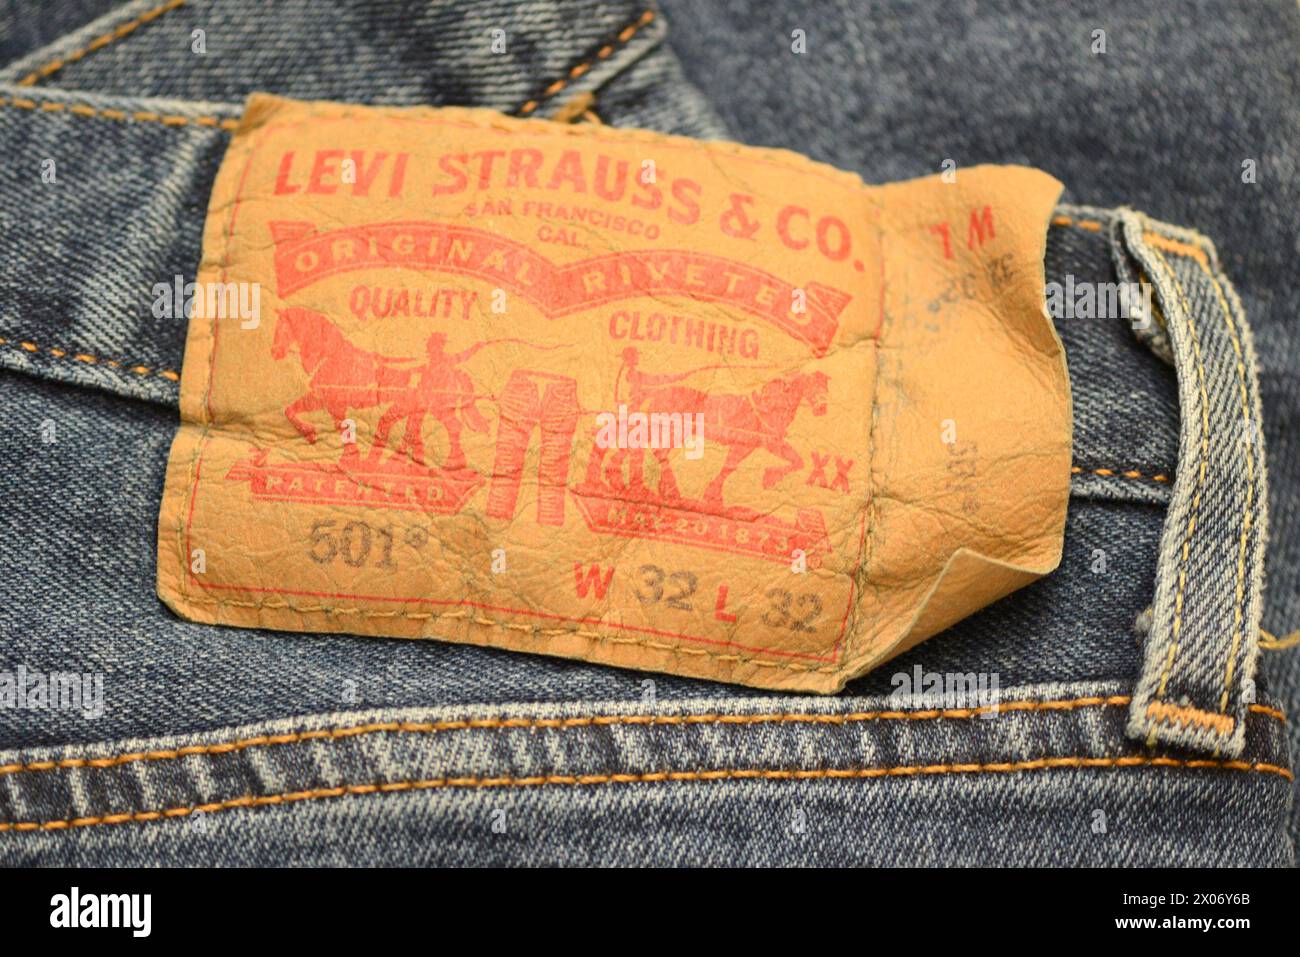 Levi Strauss 501 original jeans leather label close up detail Stock Photo